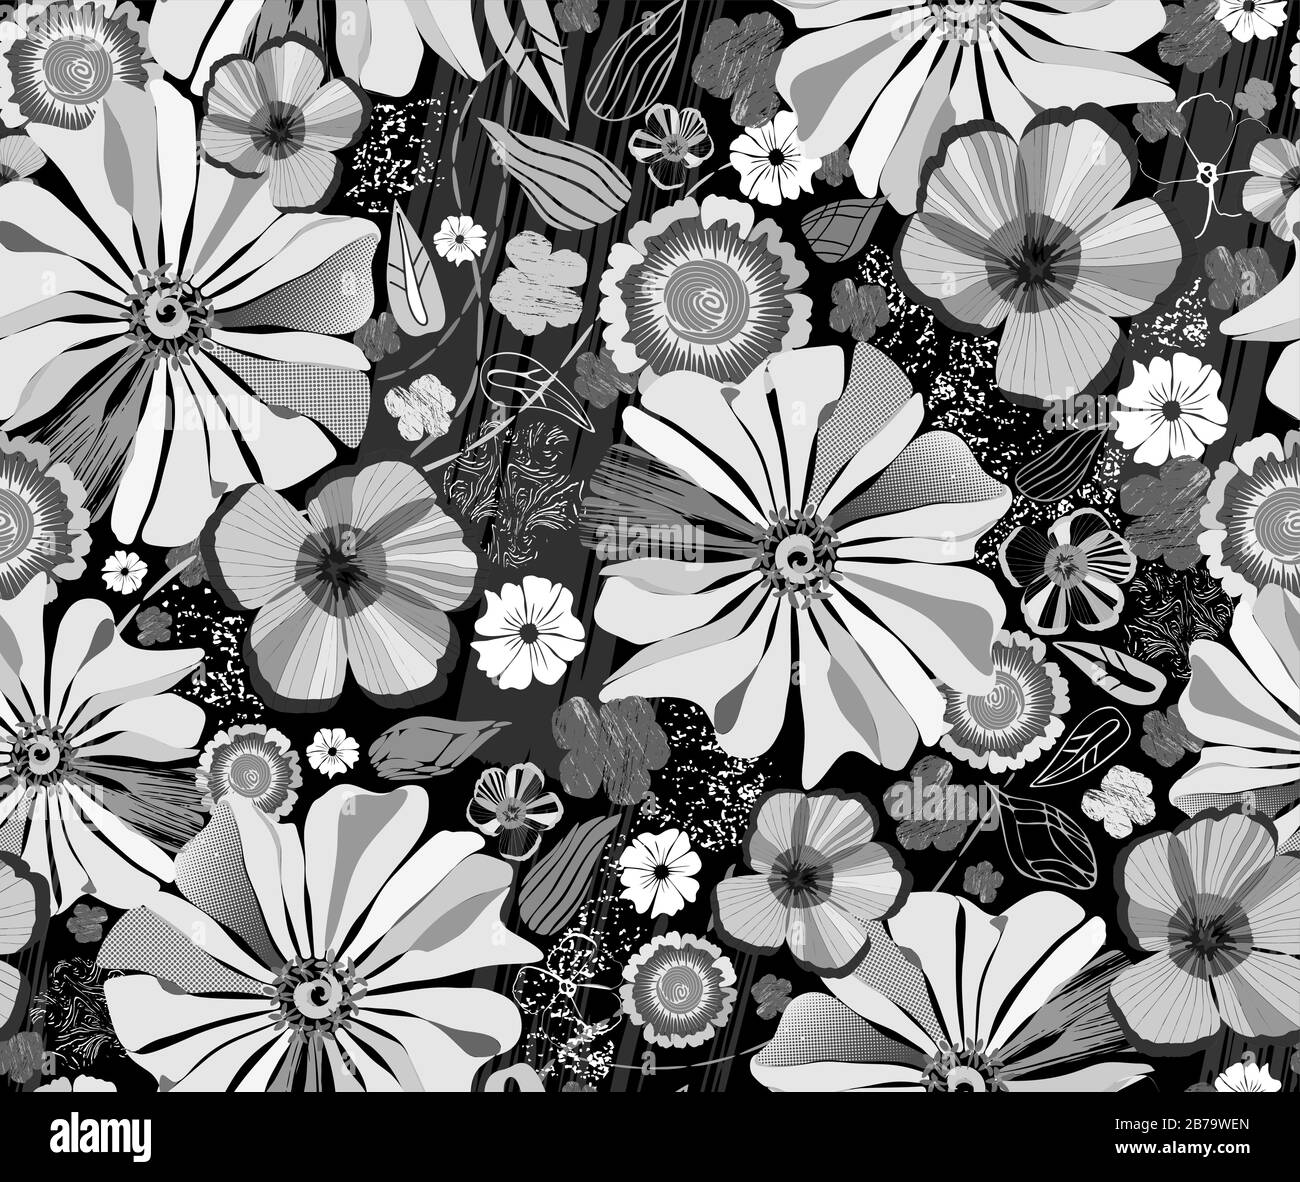 Monochromatic black & white vector repeating pattern with stylized garden flowers and texture elements. For a curtain panel, bedding, fashionwear. Stock Vector